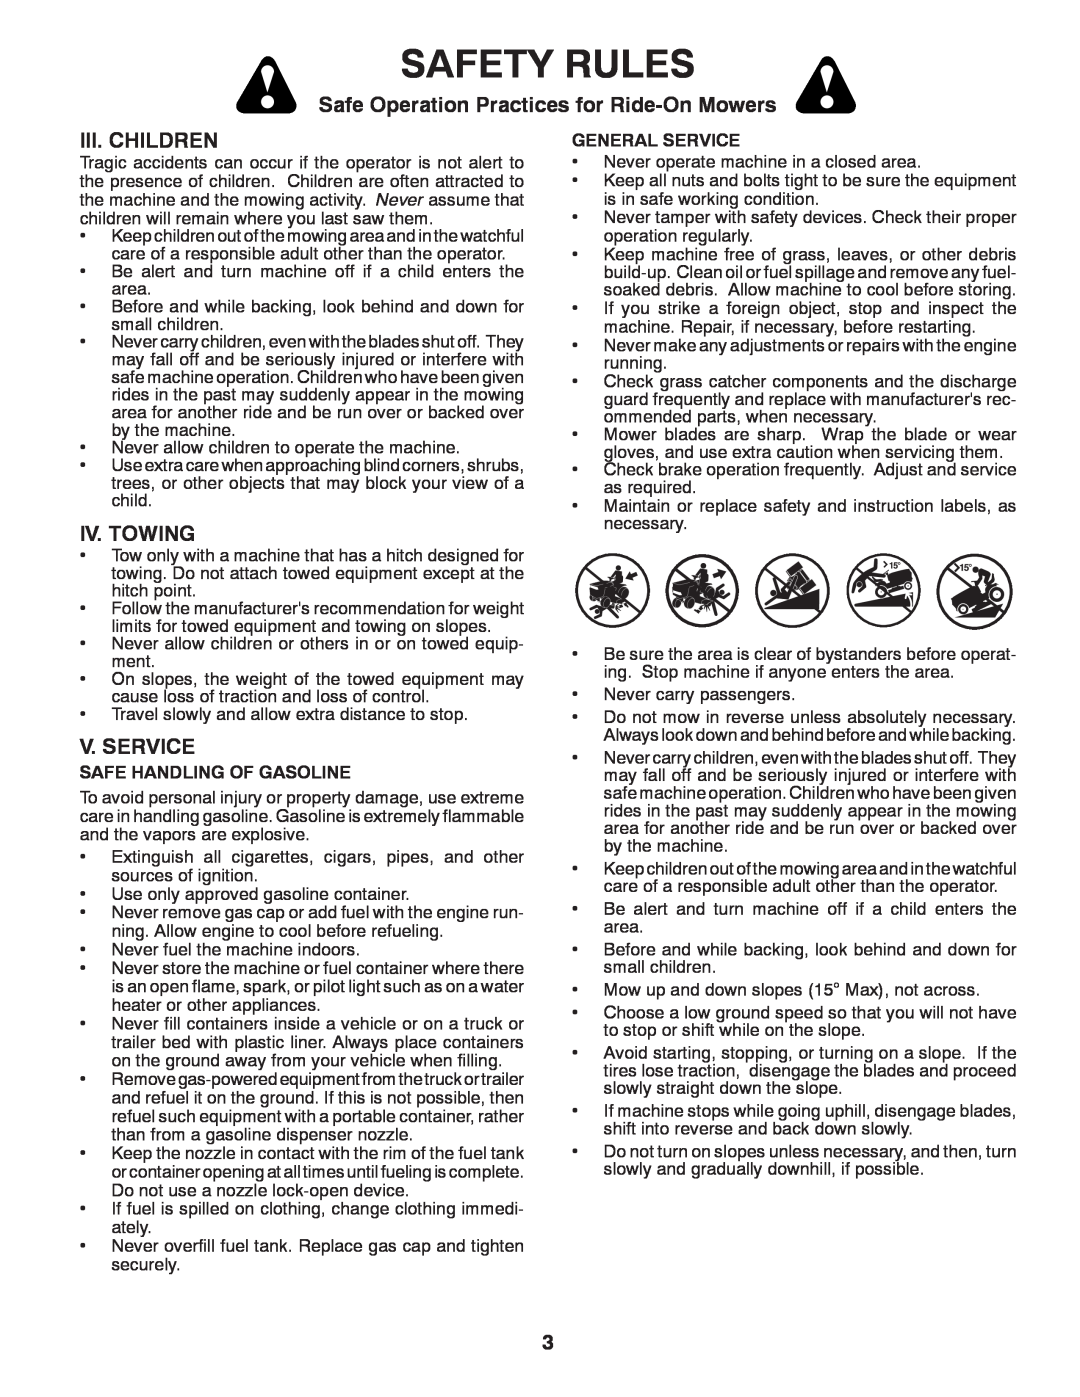 Poulan 427159 manual Safety Rules, Safe Operation Practices for Ride-On Mowers, Iii. Children, Iv. Towing, V. Service 